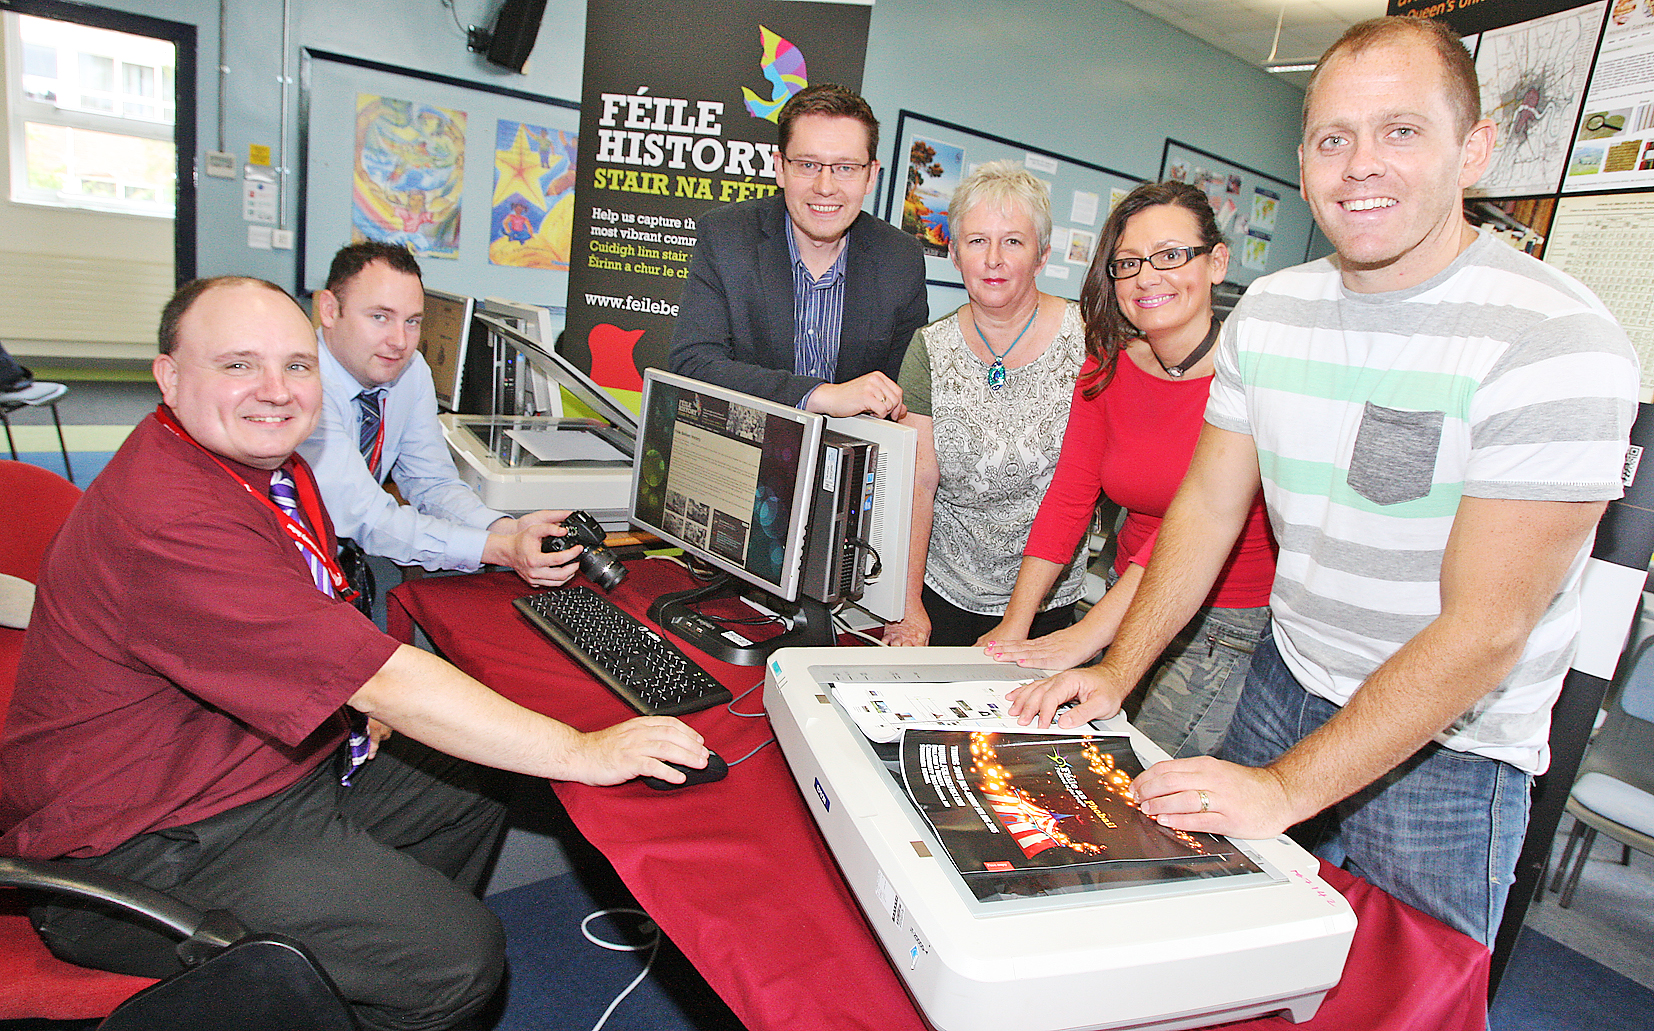 The Féile History team:David Hardy, Anthony Anderson and Elaine Reid of the Centre for Data Digitisation and Analysis at QUB, with Michael Pierse and Feargal Mac Ionnrachtaigh of the QUB School of Modern Languages and Deirdre Mackel, Féile